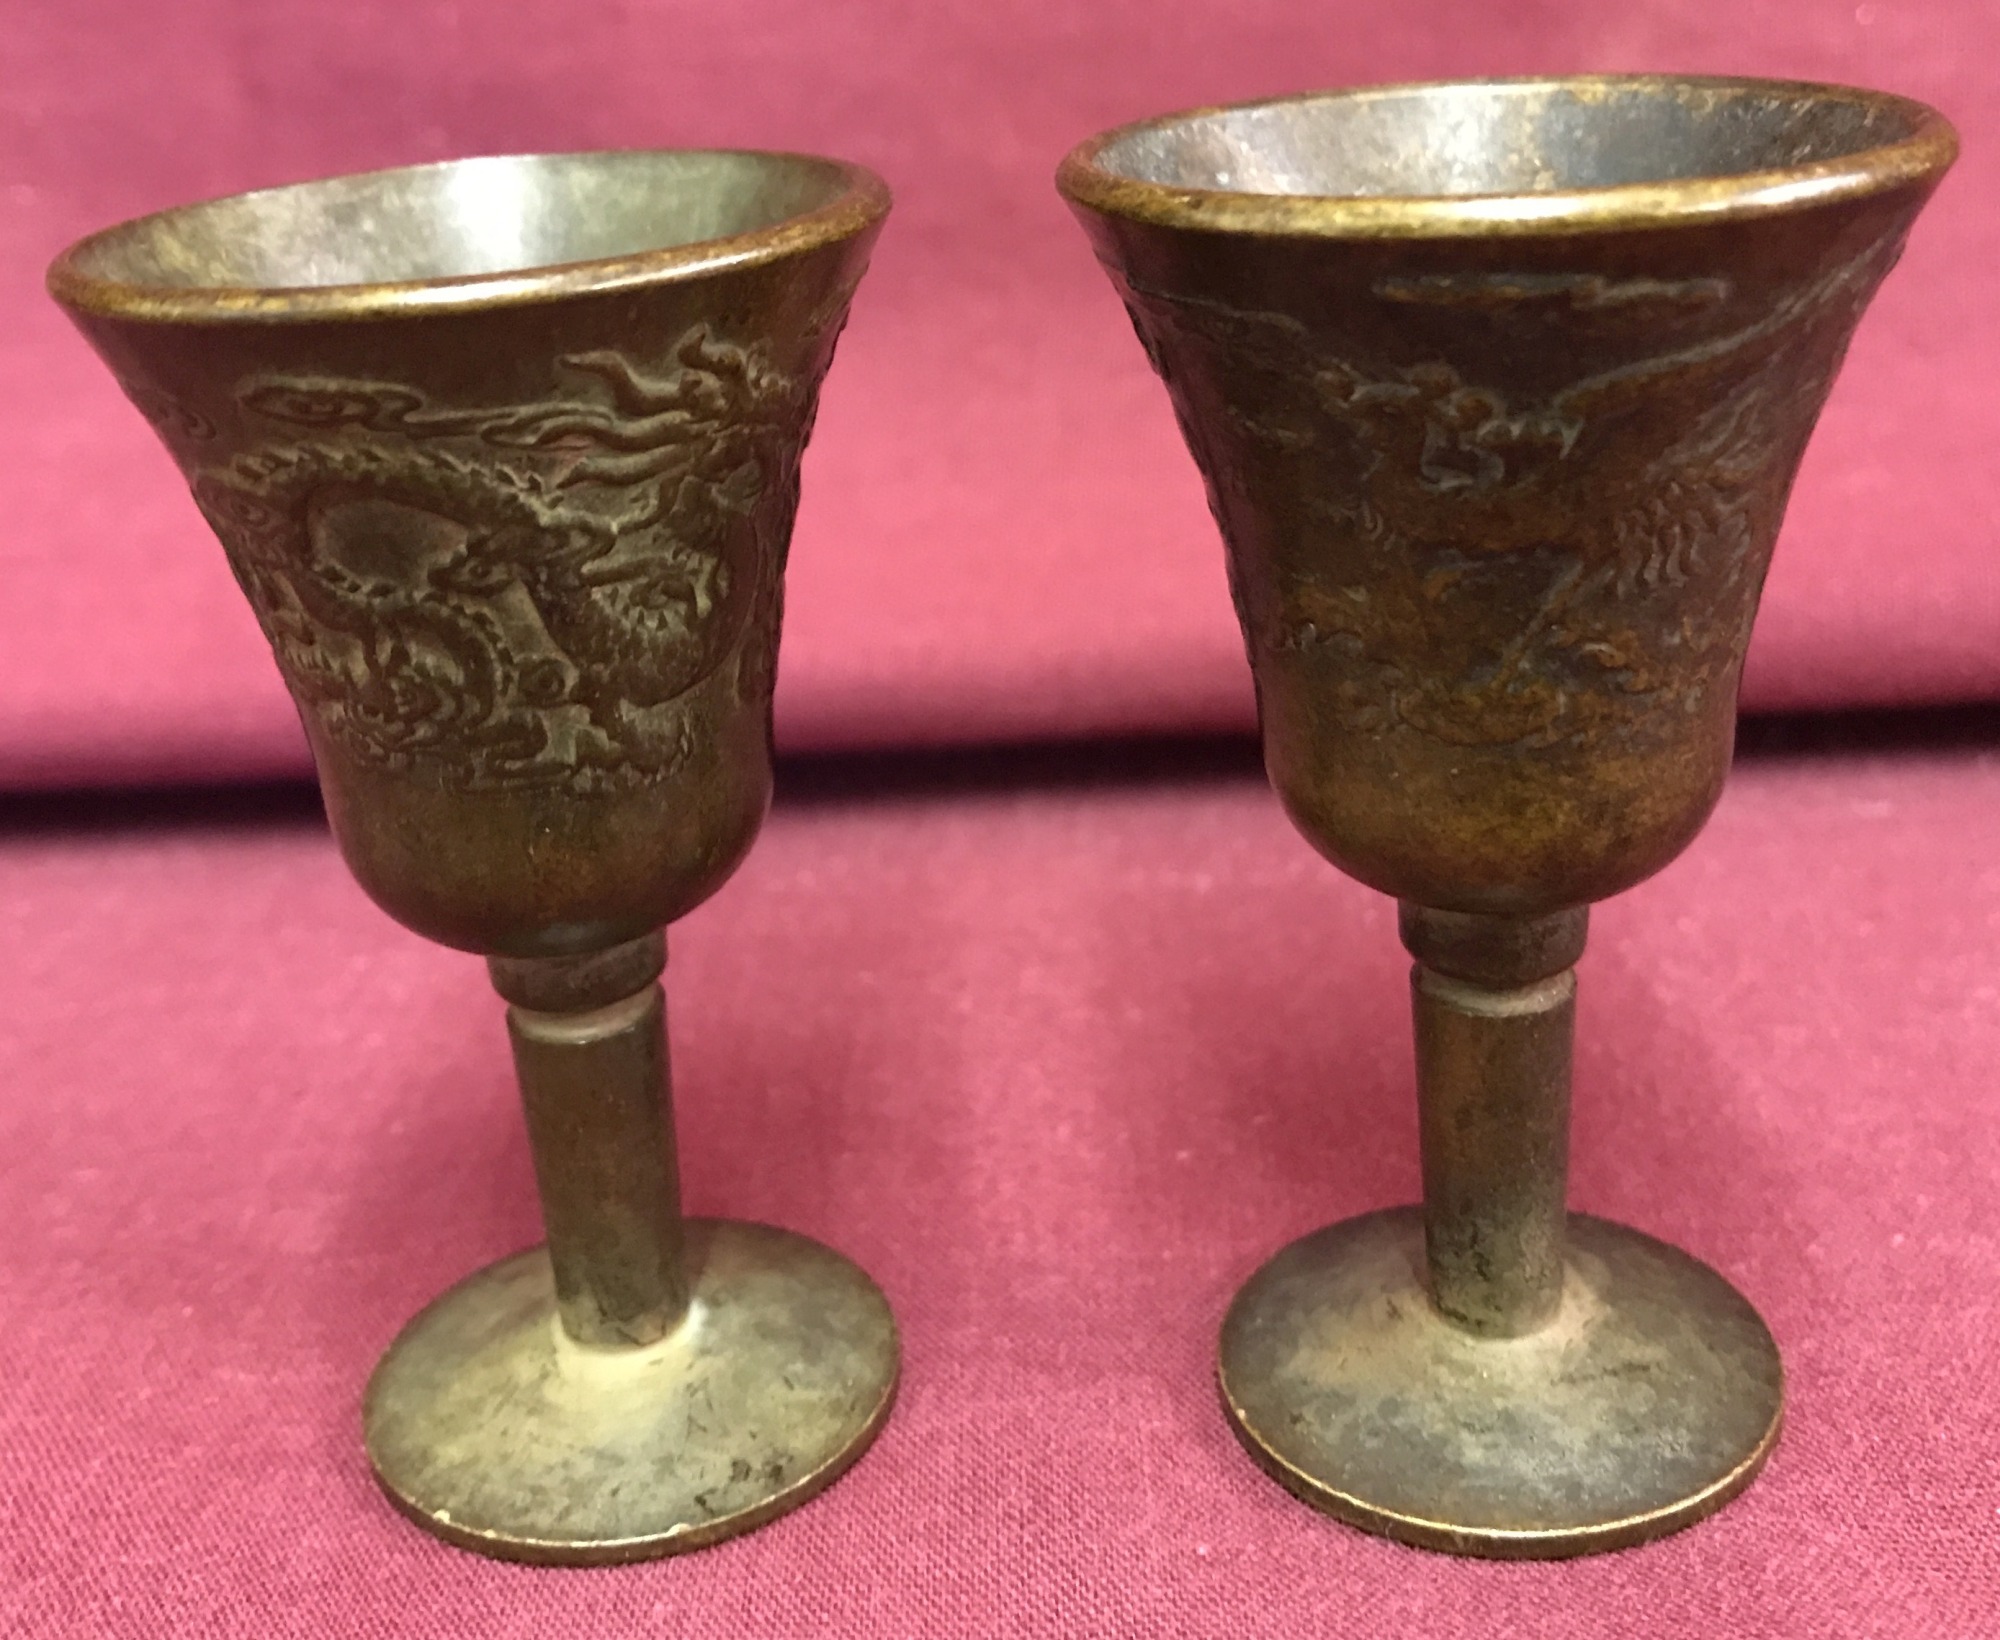 2 small Chinese bronze stemmed goblets with dragon design to outer bowl.